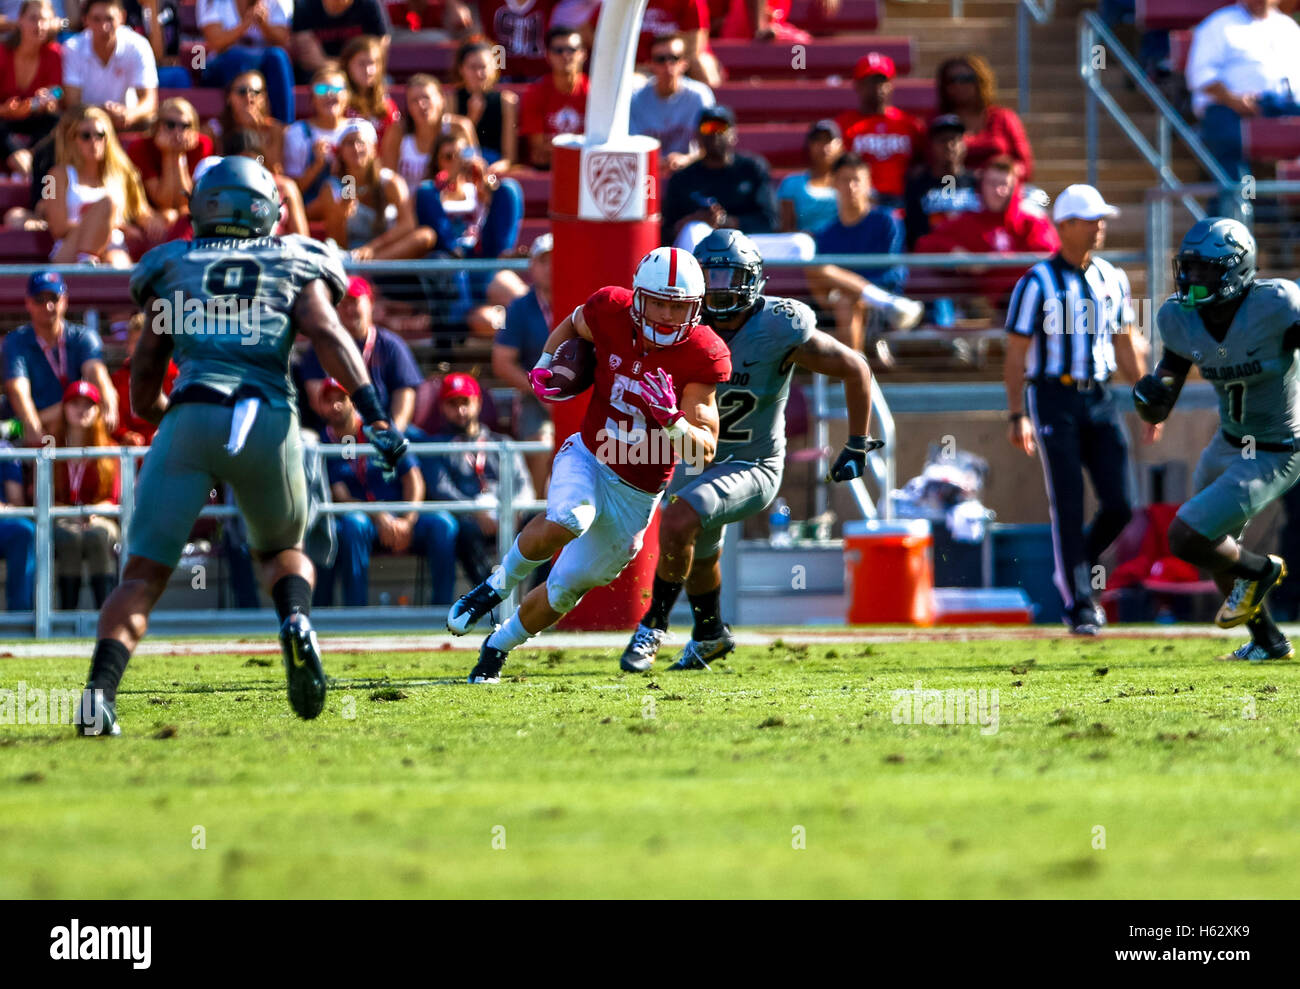 Palo Alto, California, USA. 22nd Oct, 2016. Stanford Running Back Christian McCaffrey (5) returns a punt in NCAA football action at Stanford University, featuring the Colorado Buffaloes visiting the Stanford Cardinal. Colorado won the game, 10-5. © Seth Riskin/ZUMA Wire/Alamy Live News Stock Photo